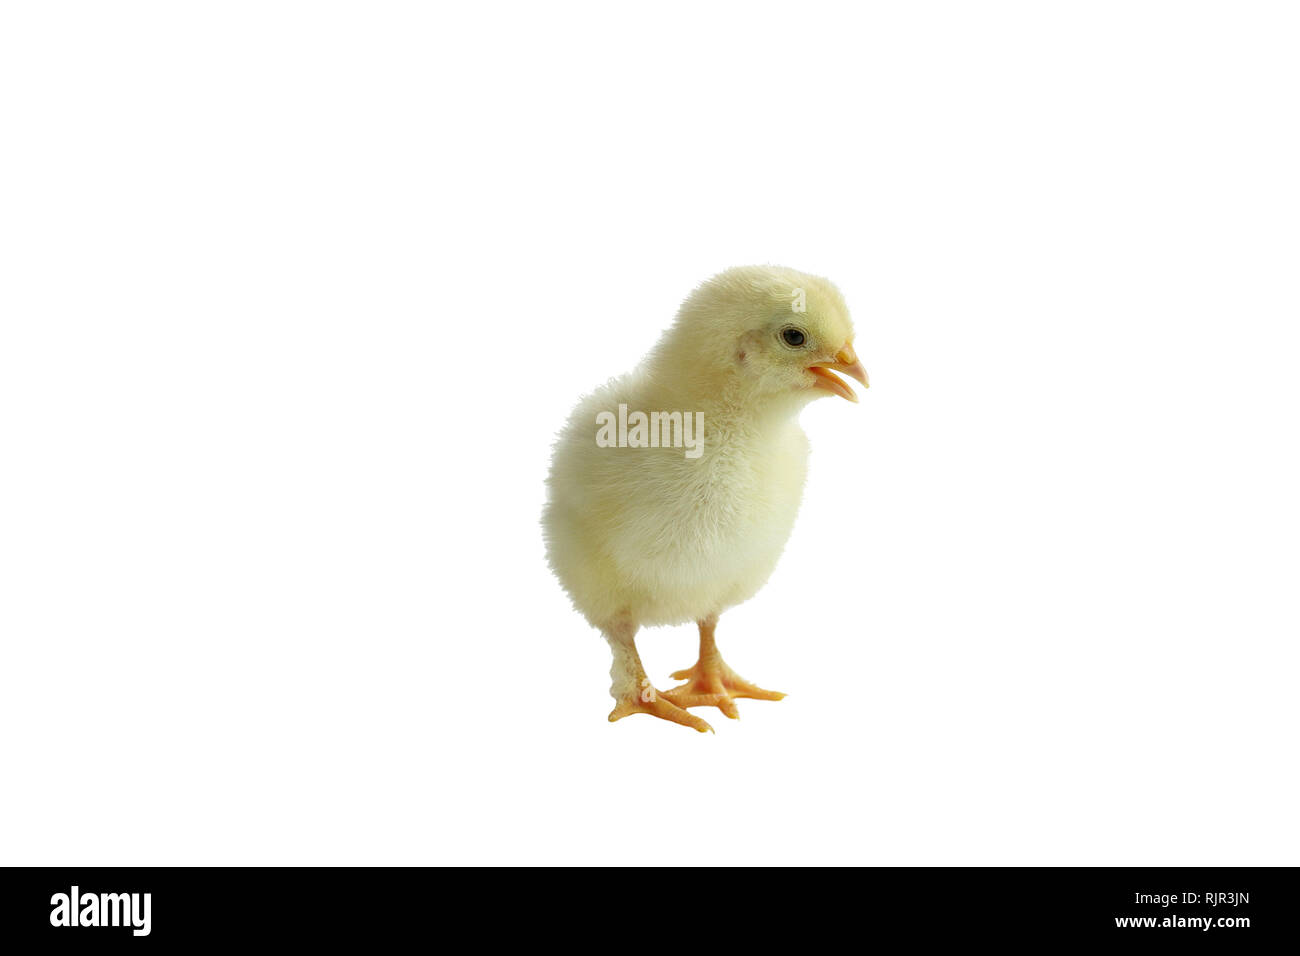 Cute little yellow French Splash Copper Maran chicken / chick isolated over a white background. Stock Photo